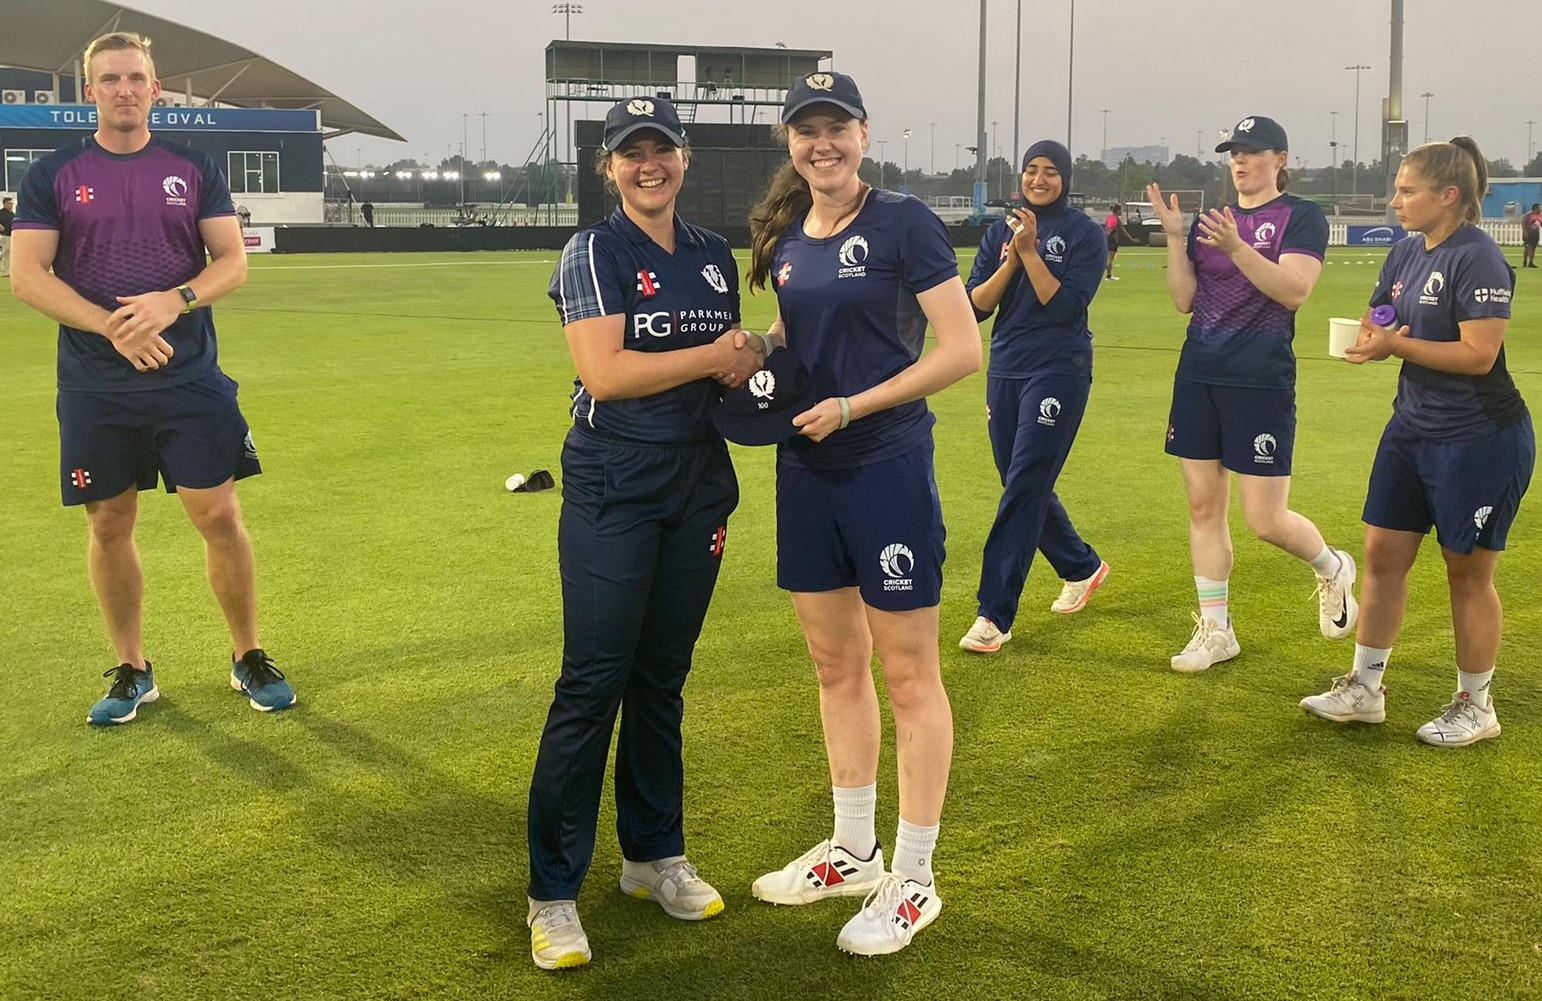 Scotland finish 6th at ICC T20 World Cup Qualifiers